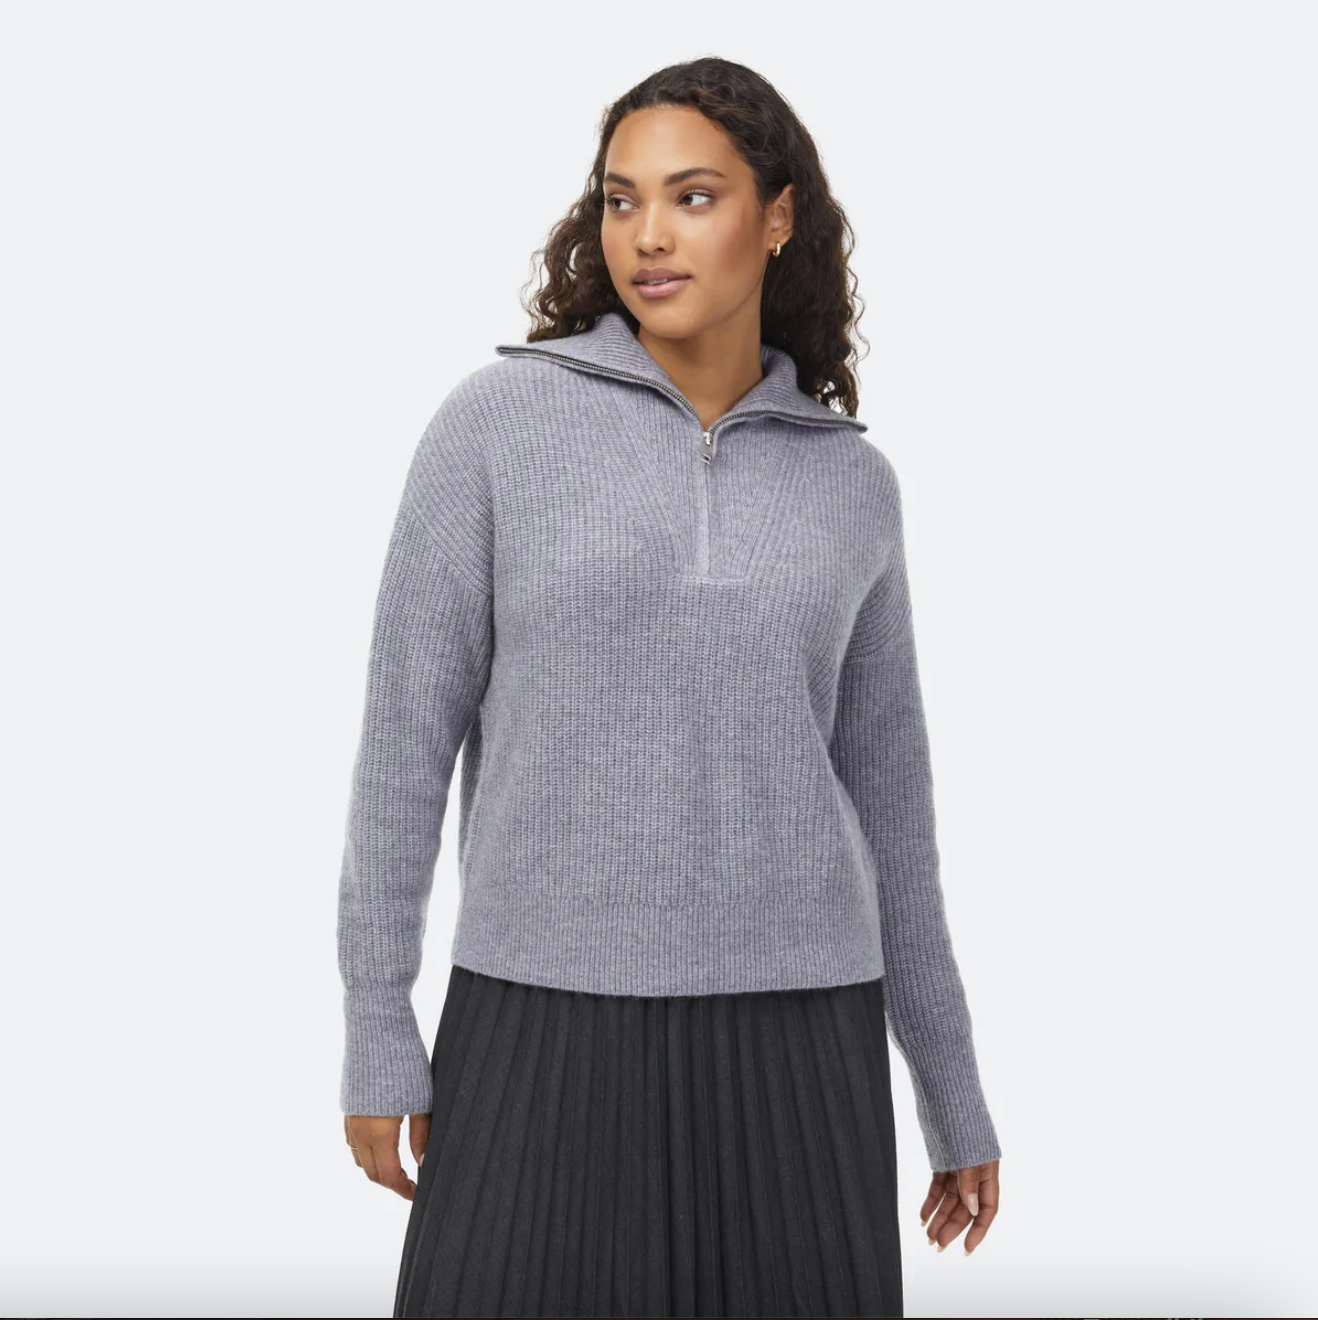 model wearing the grey ribbed quarter zip sweater